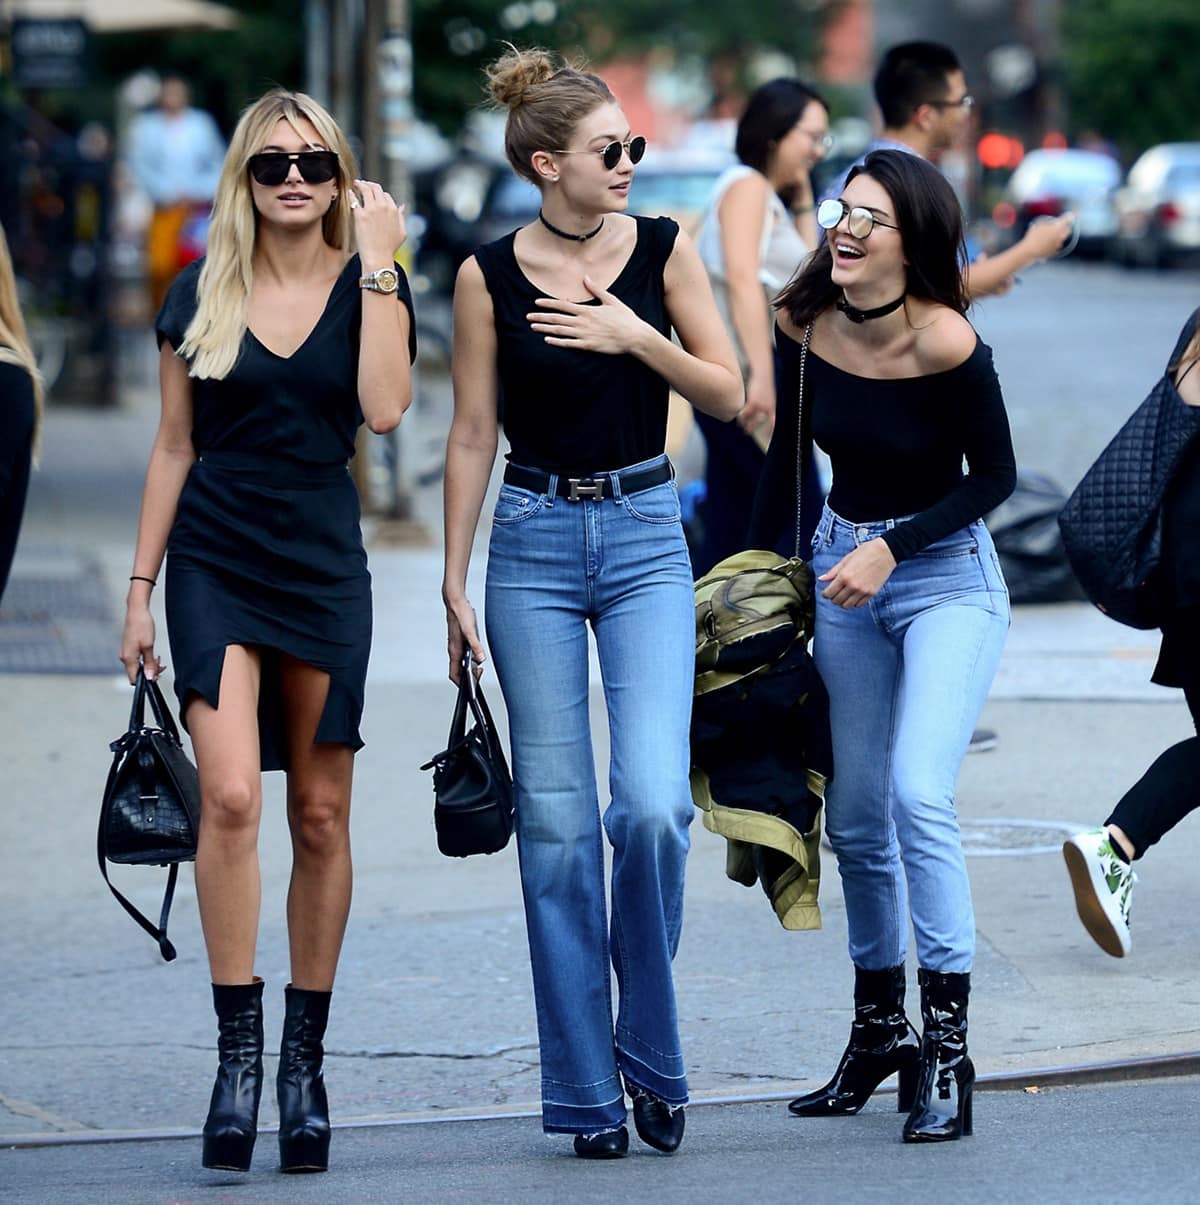 Hailey Baldwin, Gigi Hadid, and Kendall Jenner were seen in coordinated outfits in New York City on Tuesday, with Baldwin opting for a black dress and Vetements boots, Hadid wearing Stuart Weitzman nero soft croco Zepher booties, and Jenner sporting blue jeans, a black top, and black booties